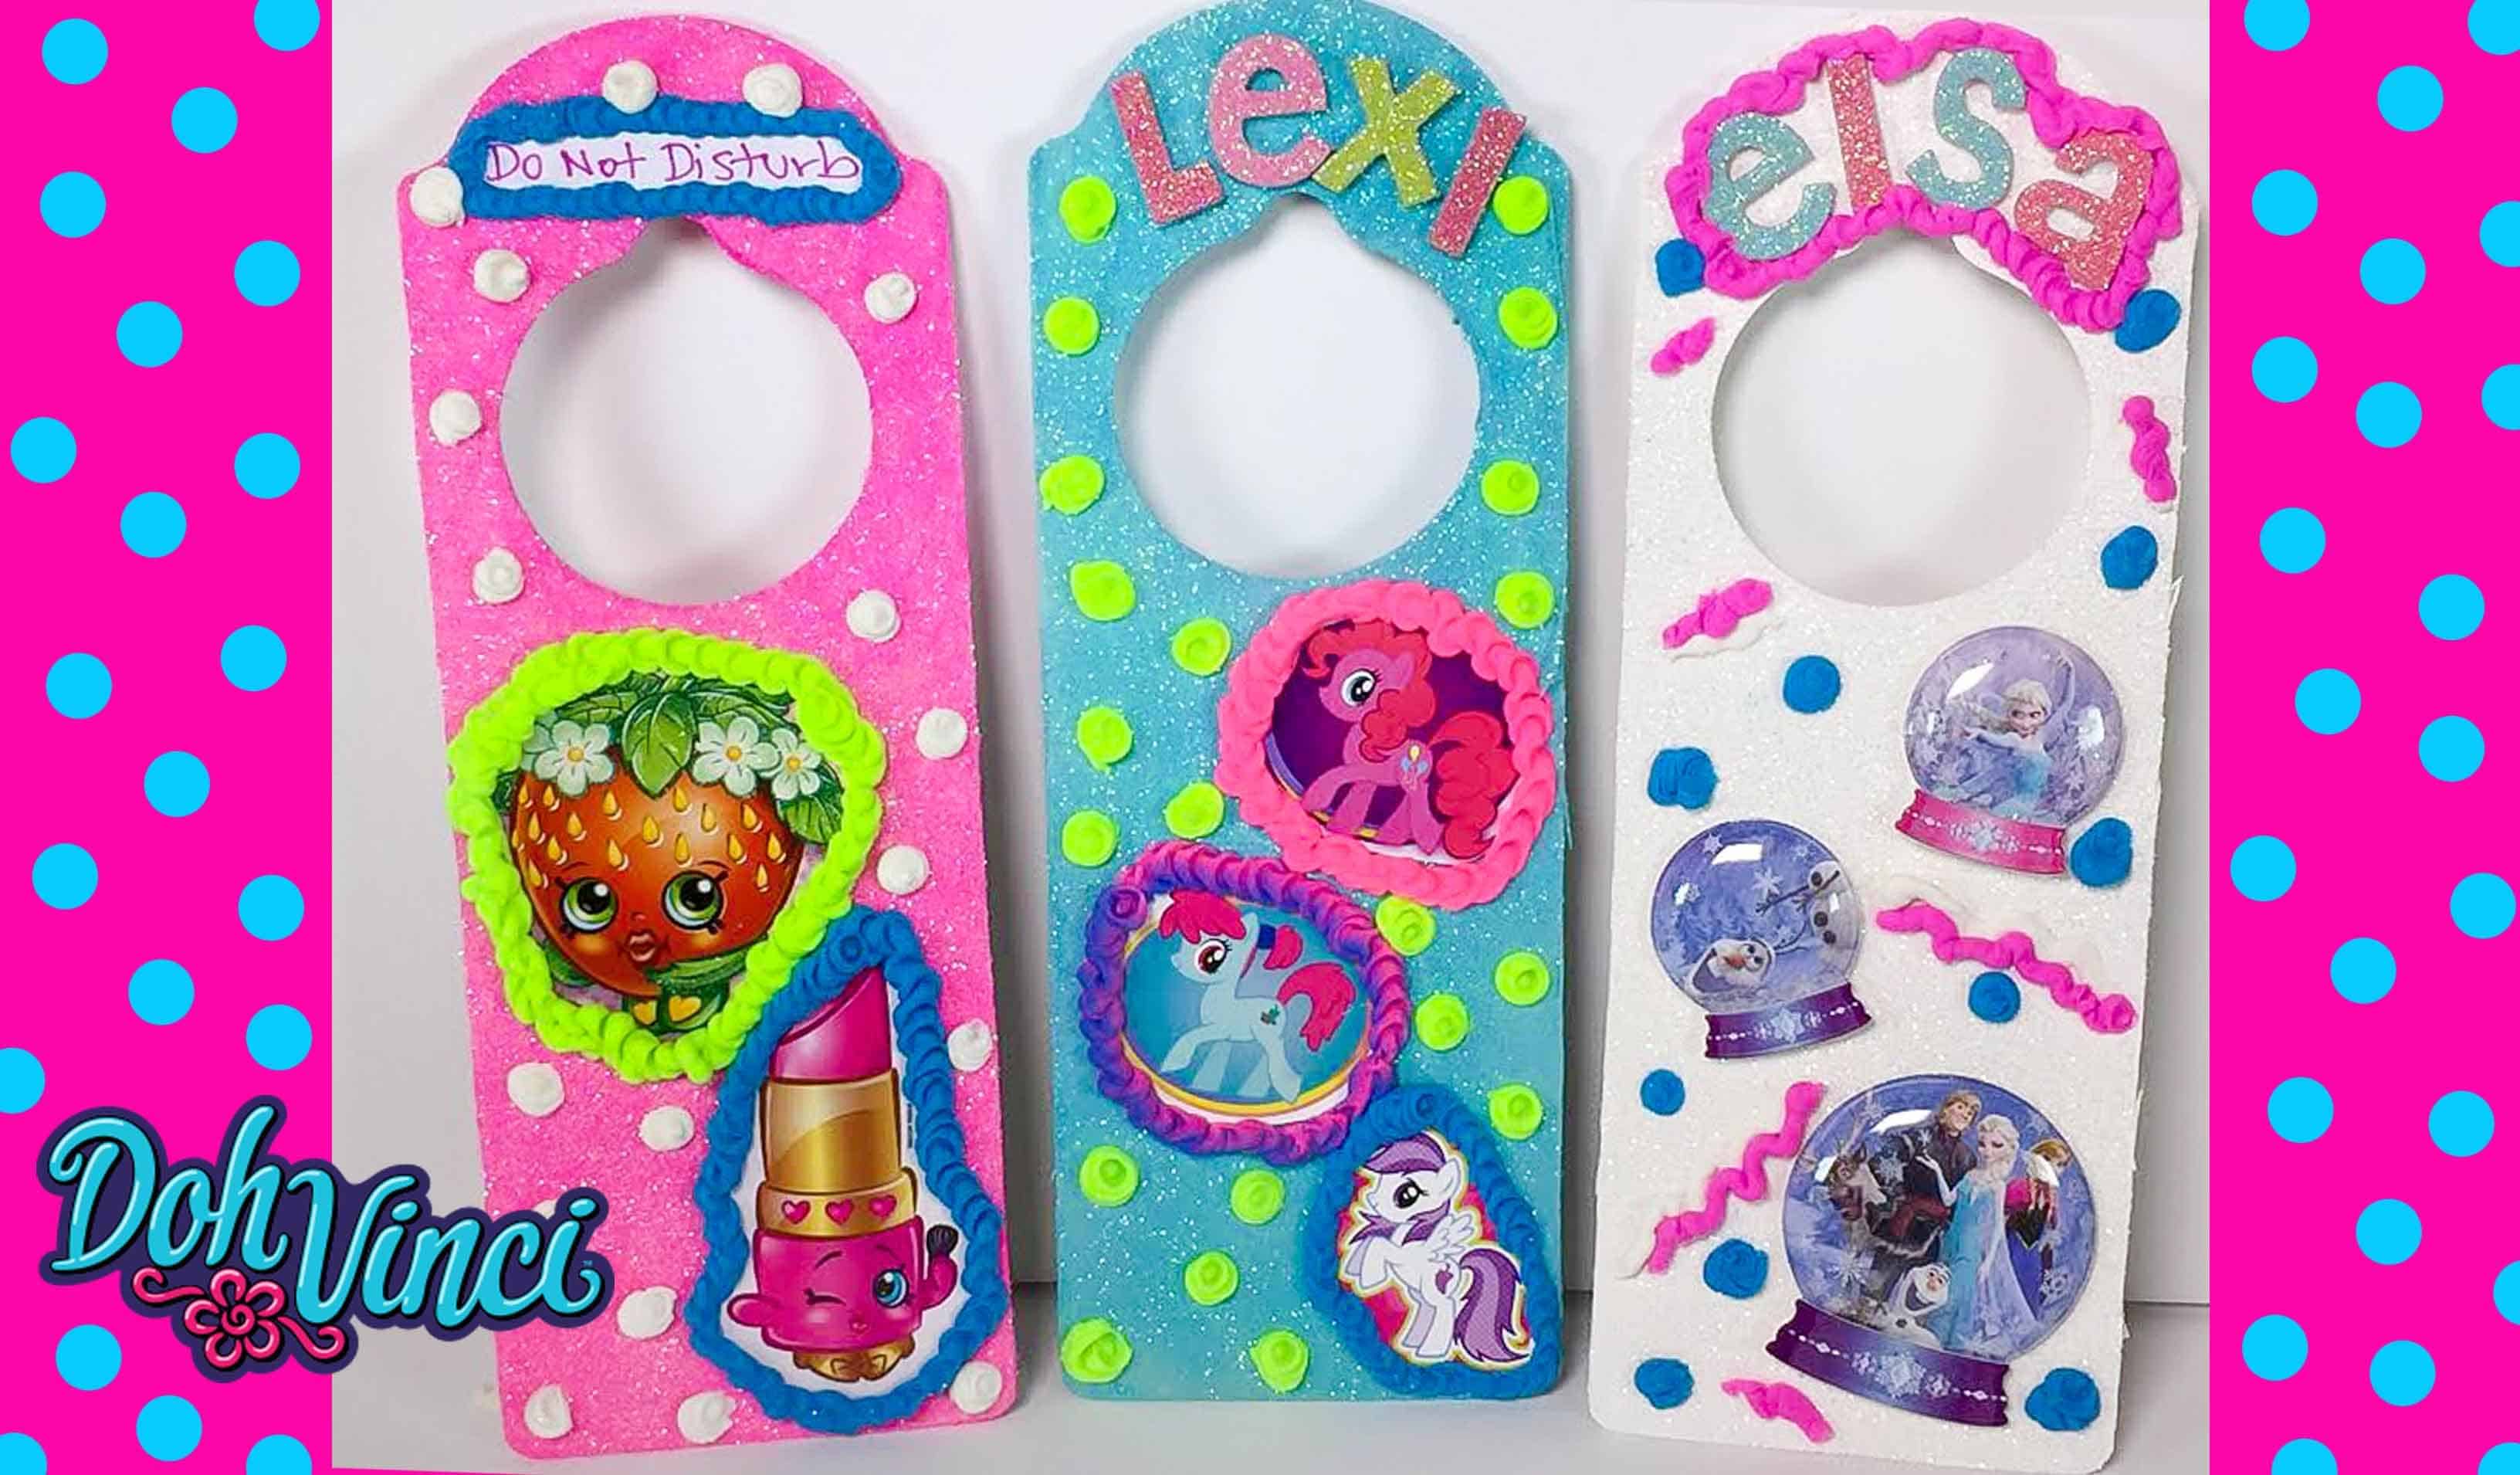 Wooden knob hanger with paint, sparkles, and stickers